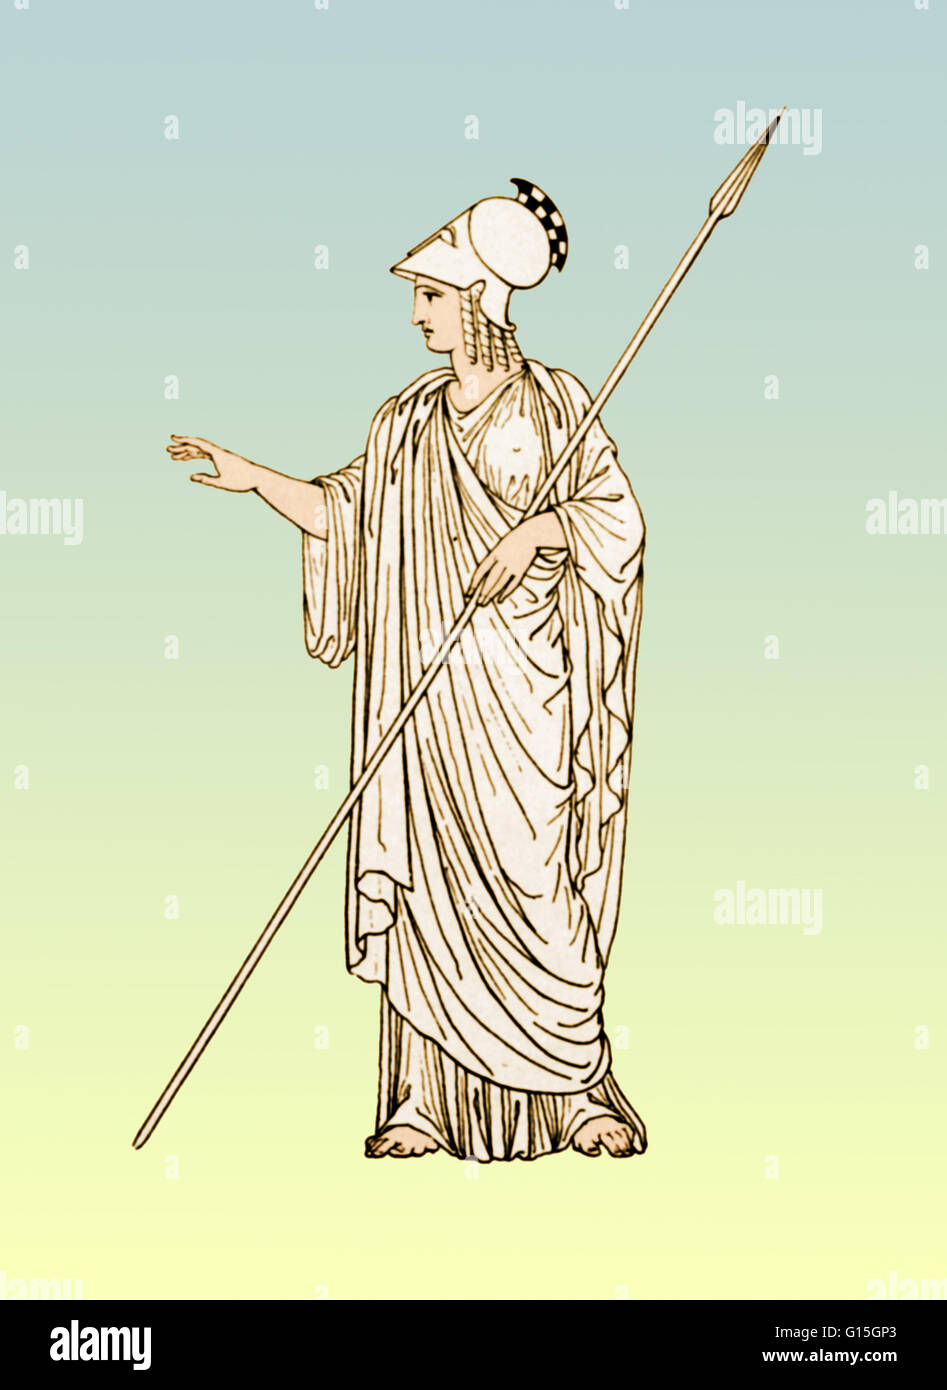 Minerva was the Roman goddess of wisdom and sponsor of arts, trade, and strategy. She was born from the godhead of Jupiter with weapons. From the 2nd century BC onwards, the Romans equated her with the Greek goddess Athena. She was the virgin goddess of m Stock Photo